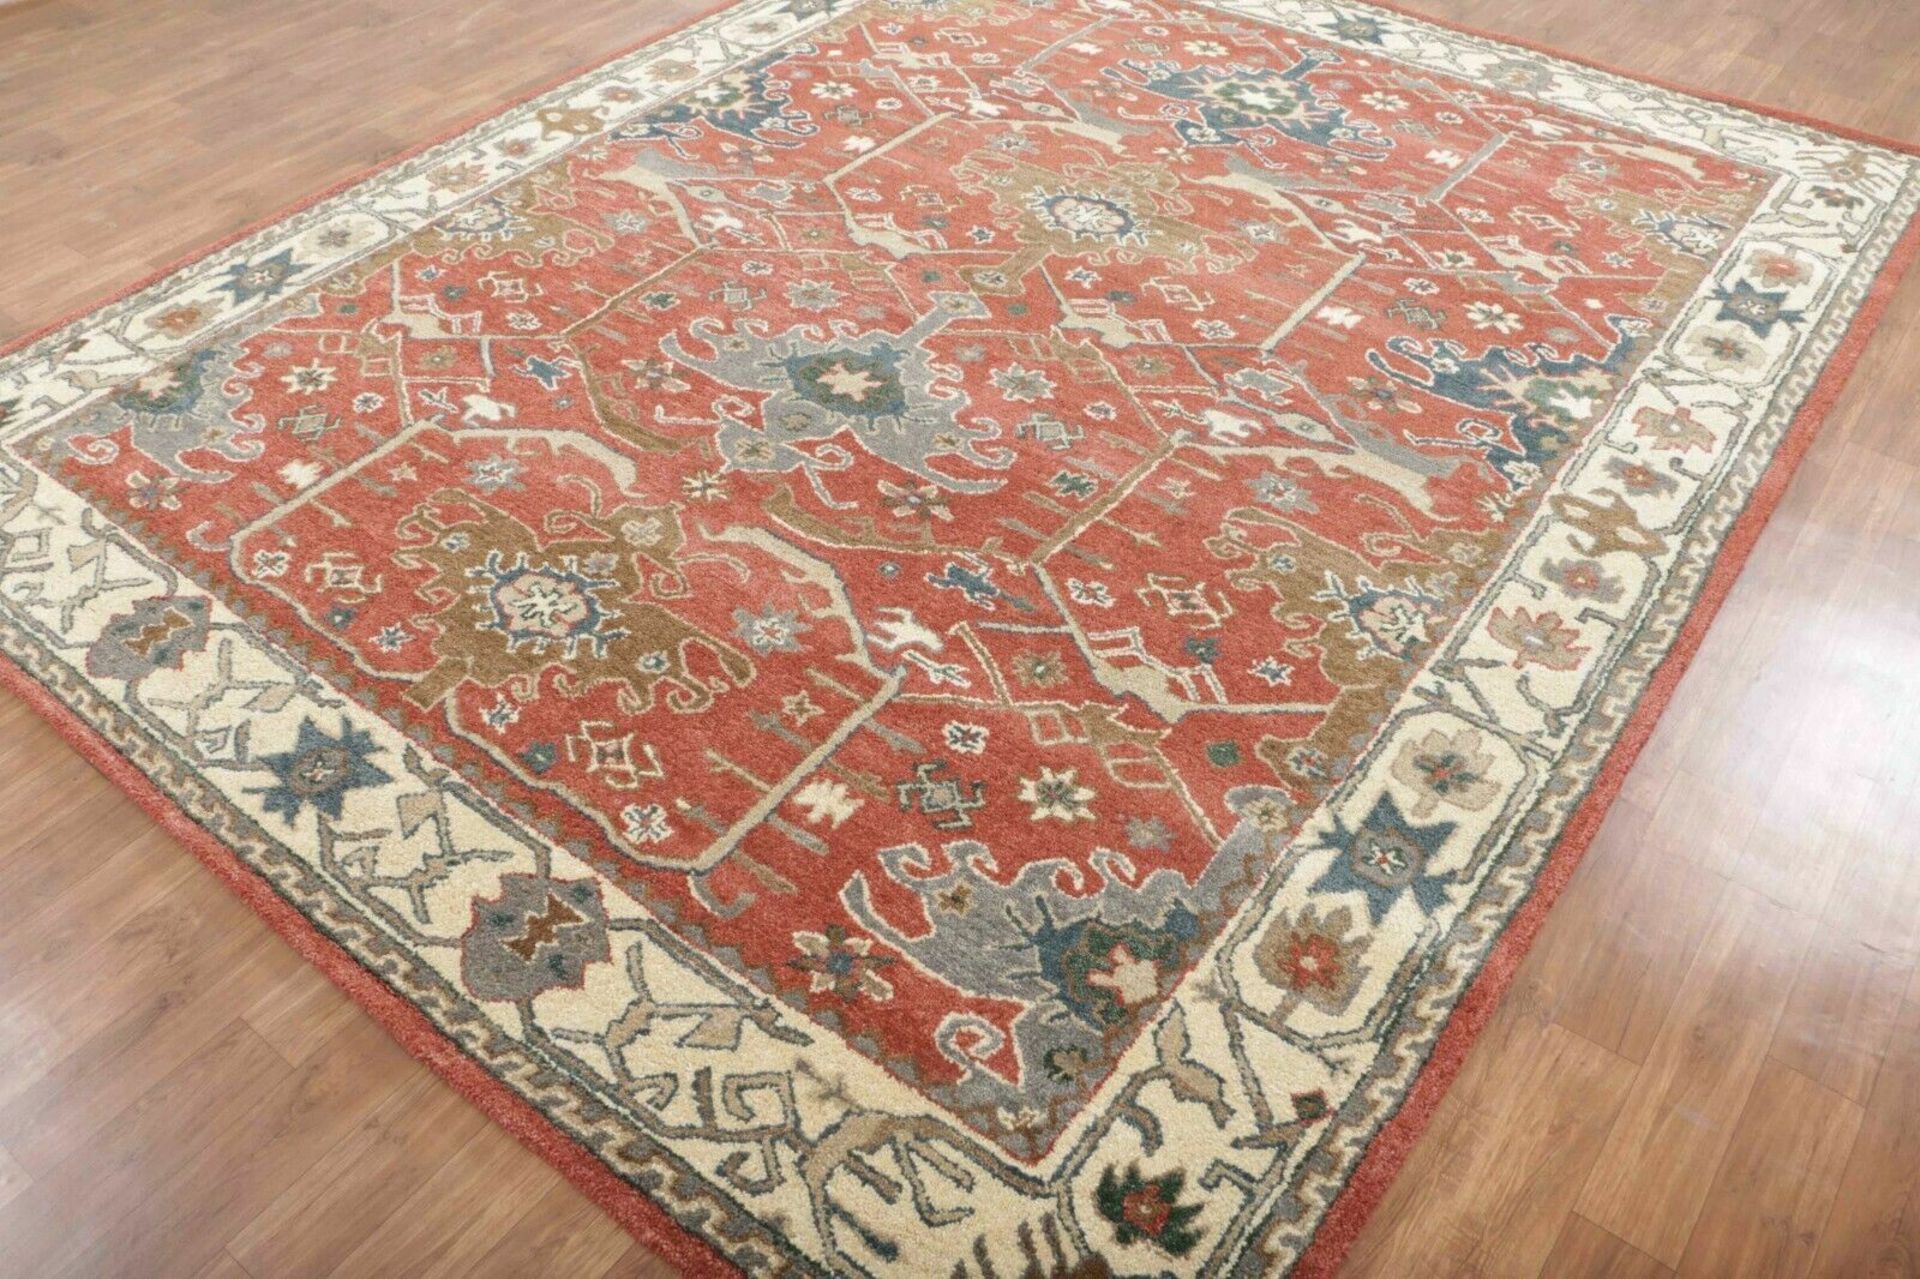 Traditional Persian Area Rug A Stunning Repeating Pattern 100% Wool Hand Tufted Rug Vibrant In